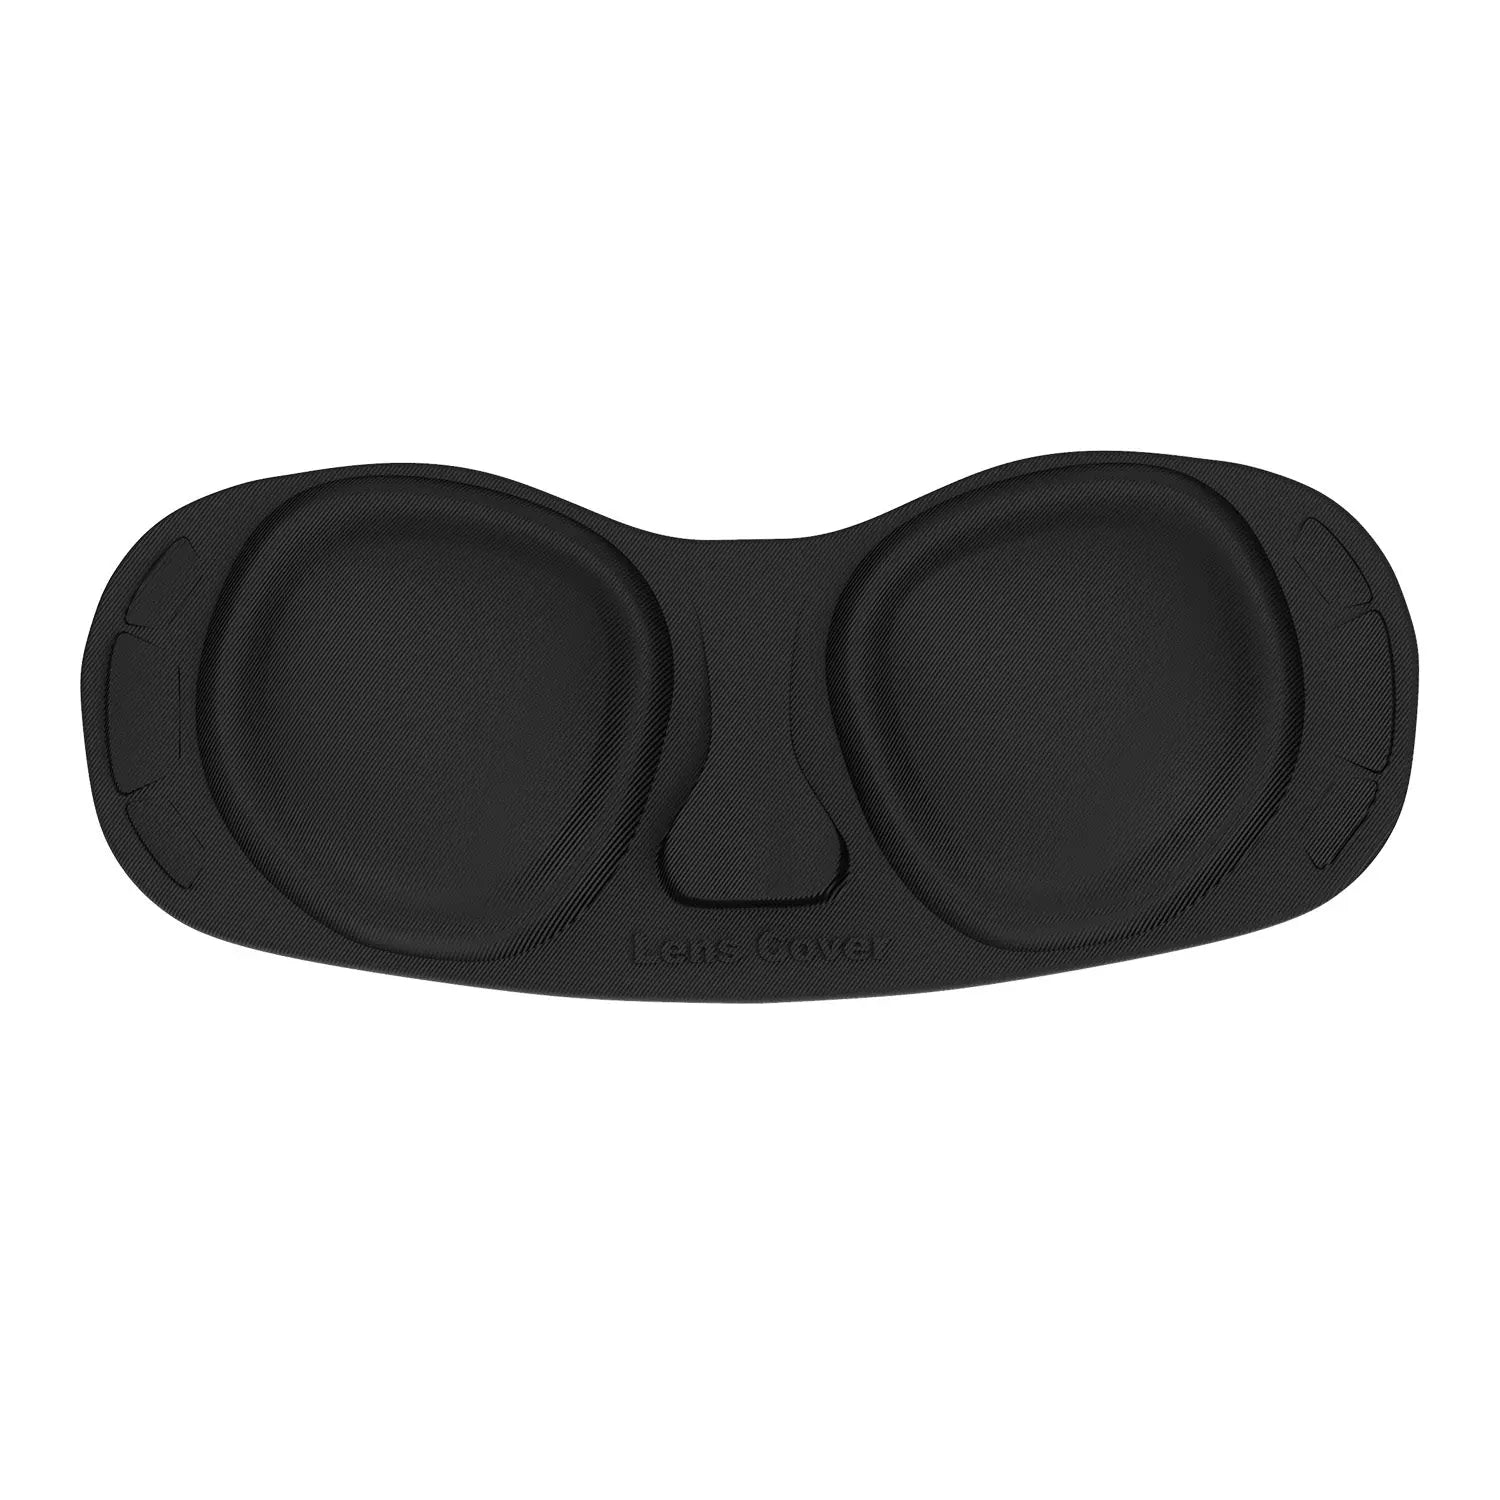 AMVR VR Lens Protective Cover Dust-Proof Pad for Quest 3, Quest 2 AMVRSHOP